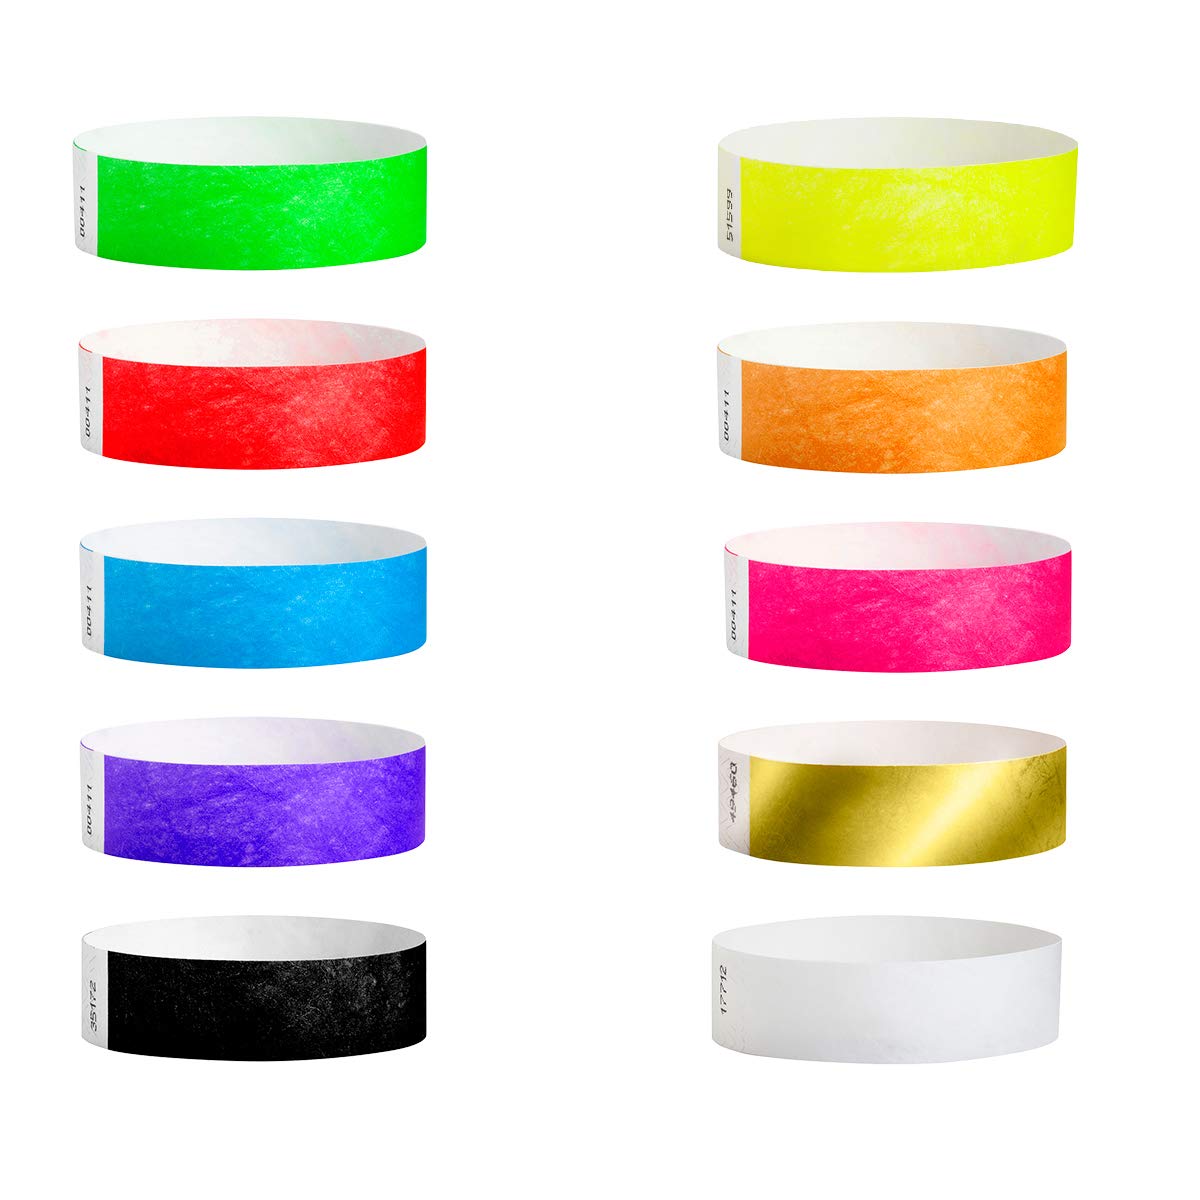 WristCo Tyvek Wristbands Color Variety Pack - 100 Count ¾” x 10”- Waterproof Recyclable Comfortable Tear Resistant Paper Bracelets Wrist Bands for Events Concert Festival Admission Party | 10 Colors